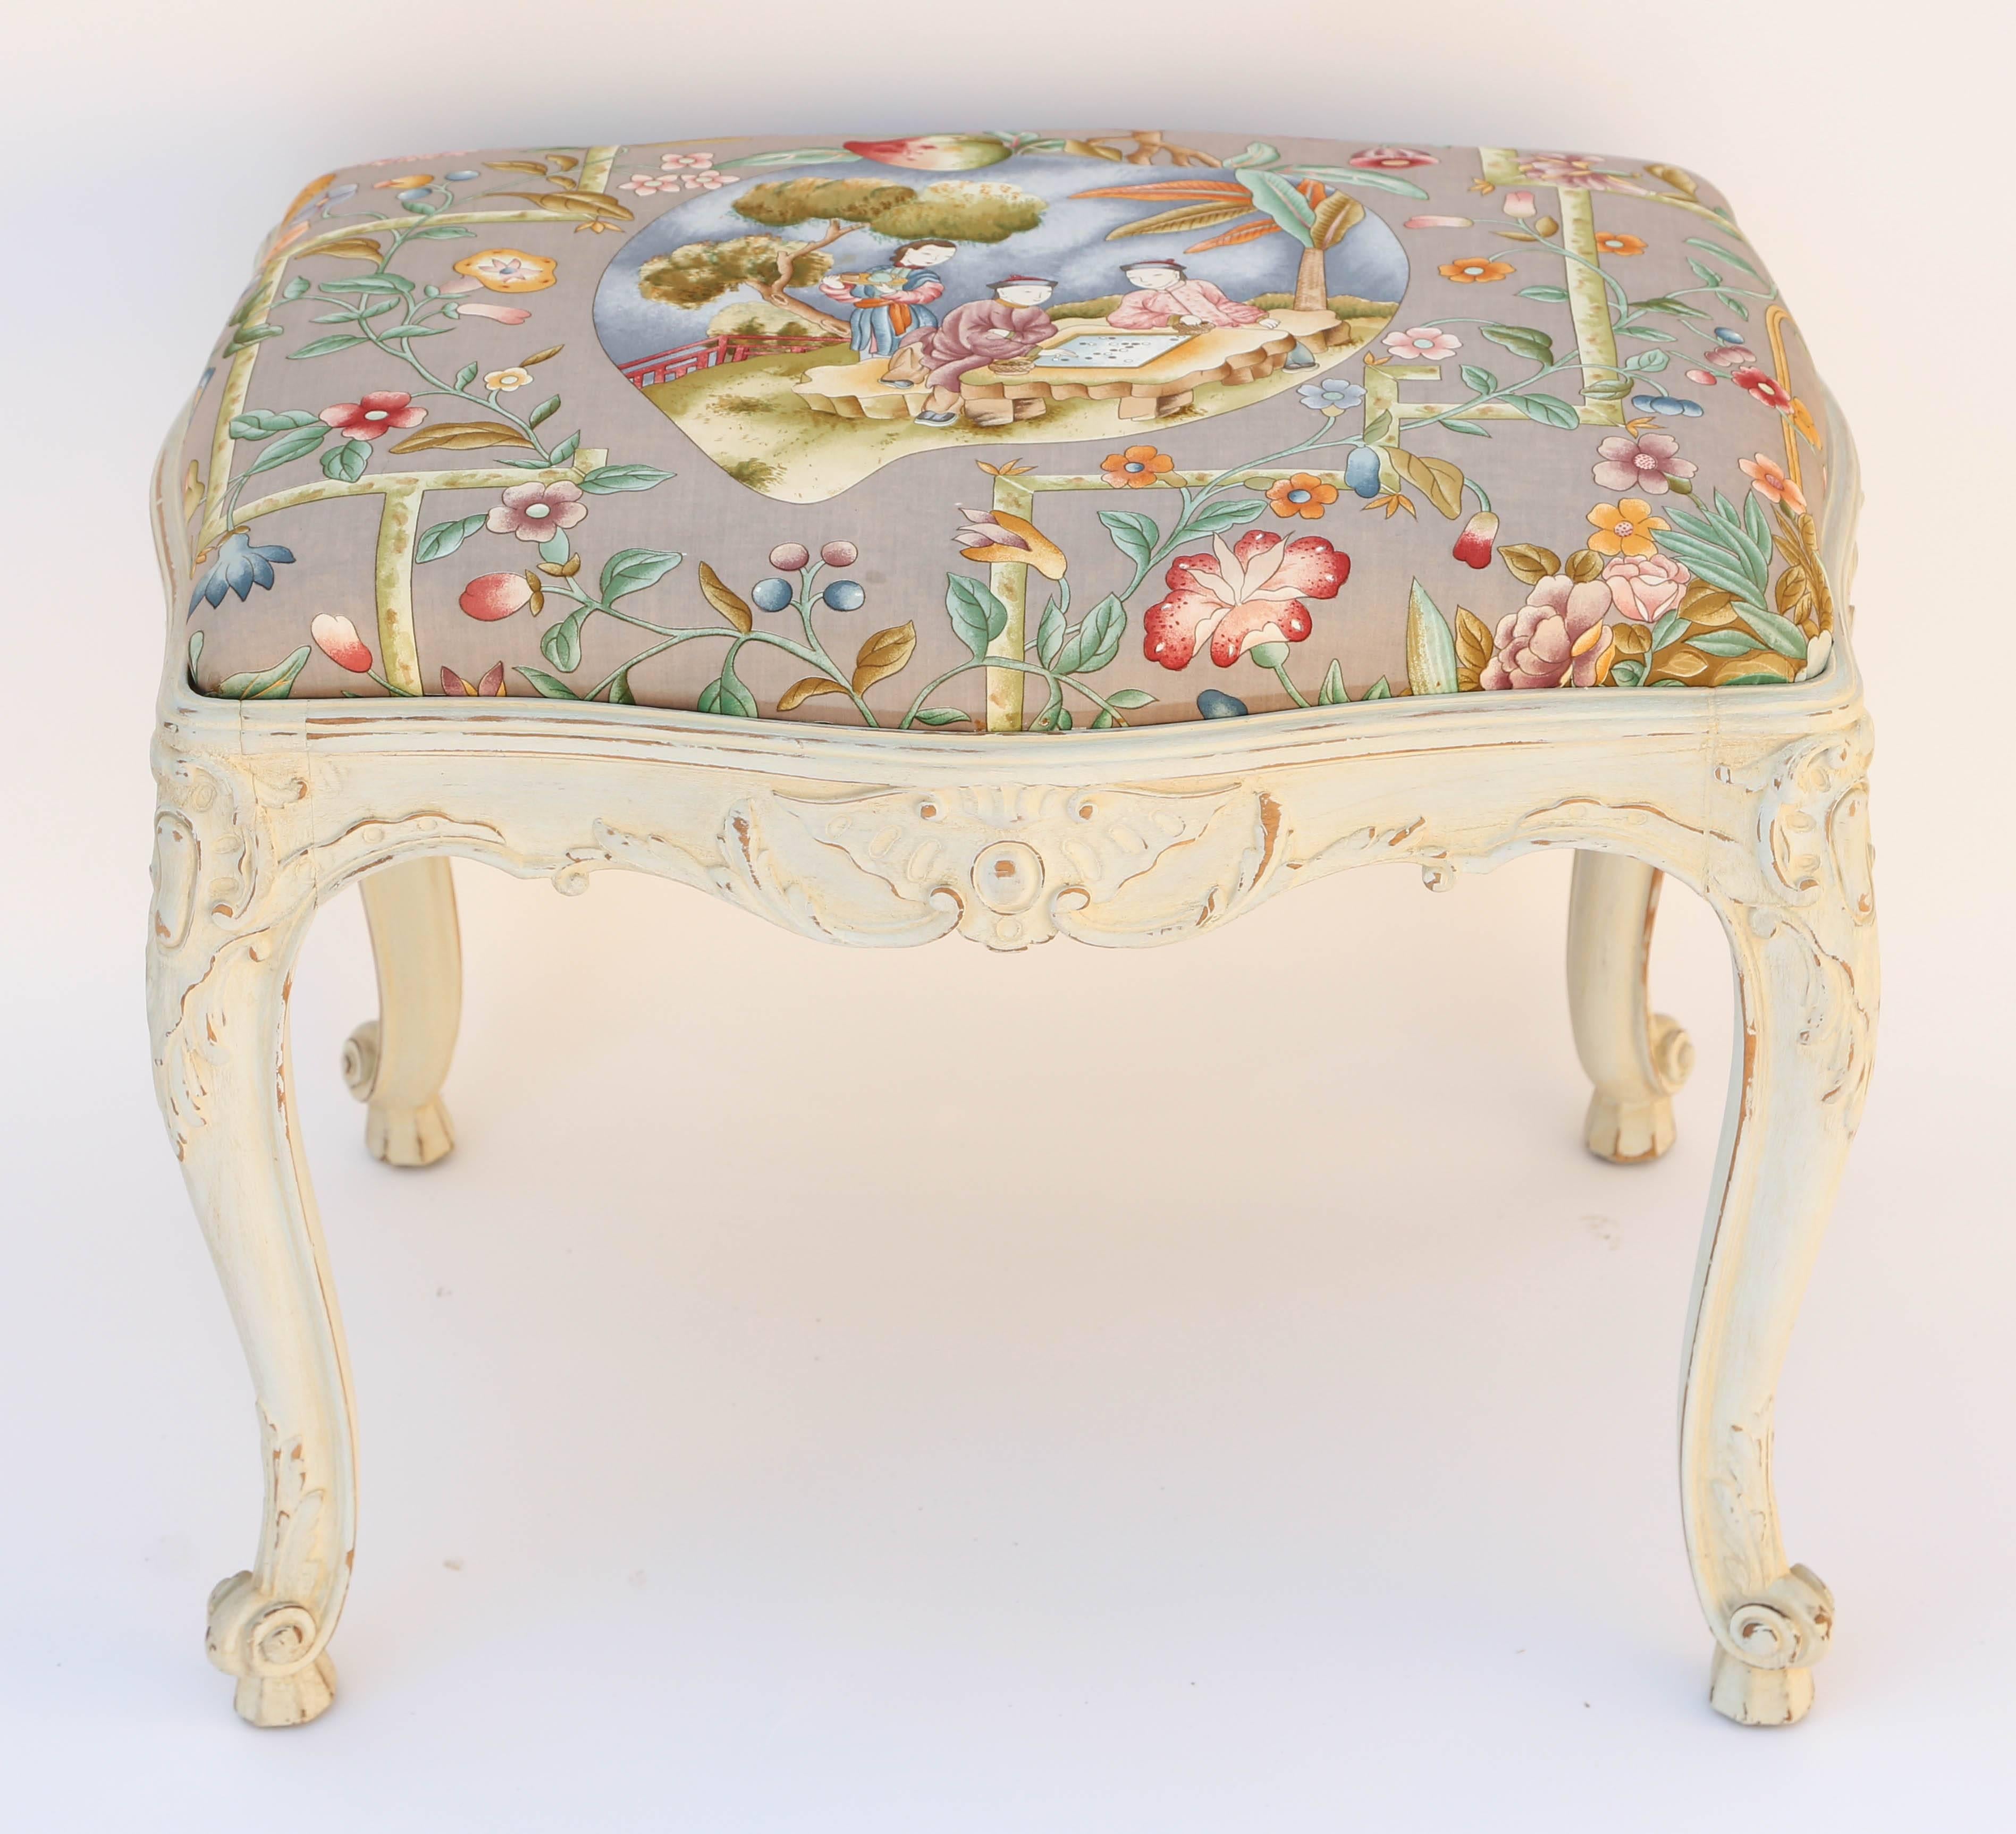 Bench, of painted walnut, having drop-in seat upholstered in exotic chinoiserie print fabric, on frame with serpentine apron carved with scrolls and centered with patera, raised on cabriole legs with scroll toes.

Stock ID: D1458